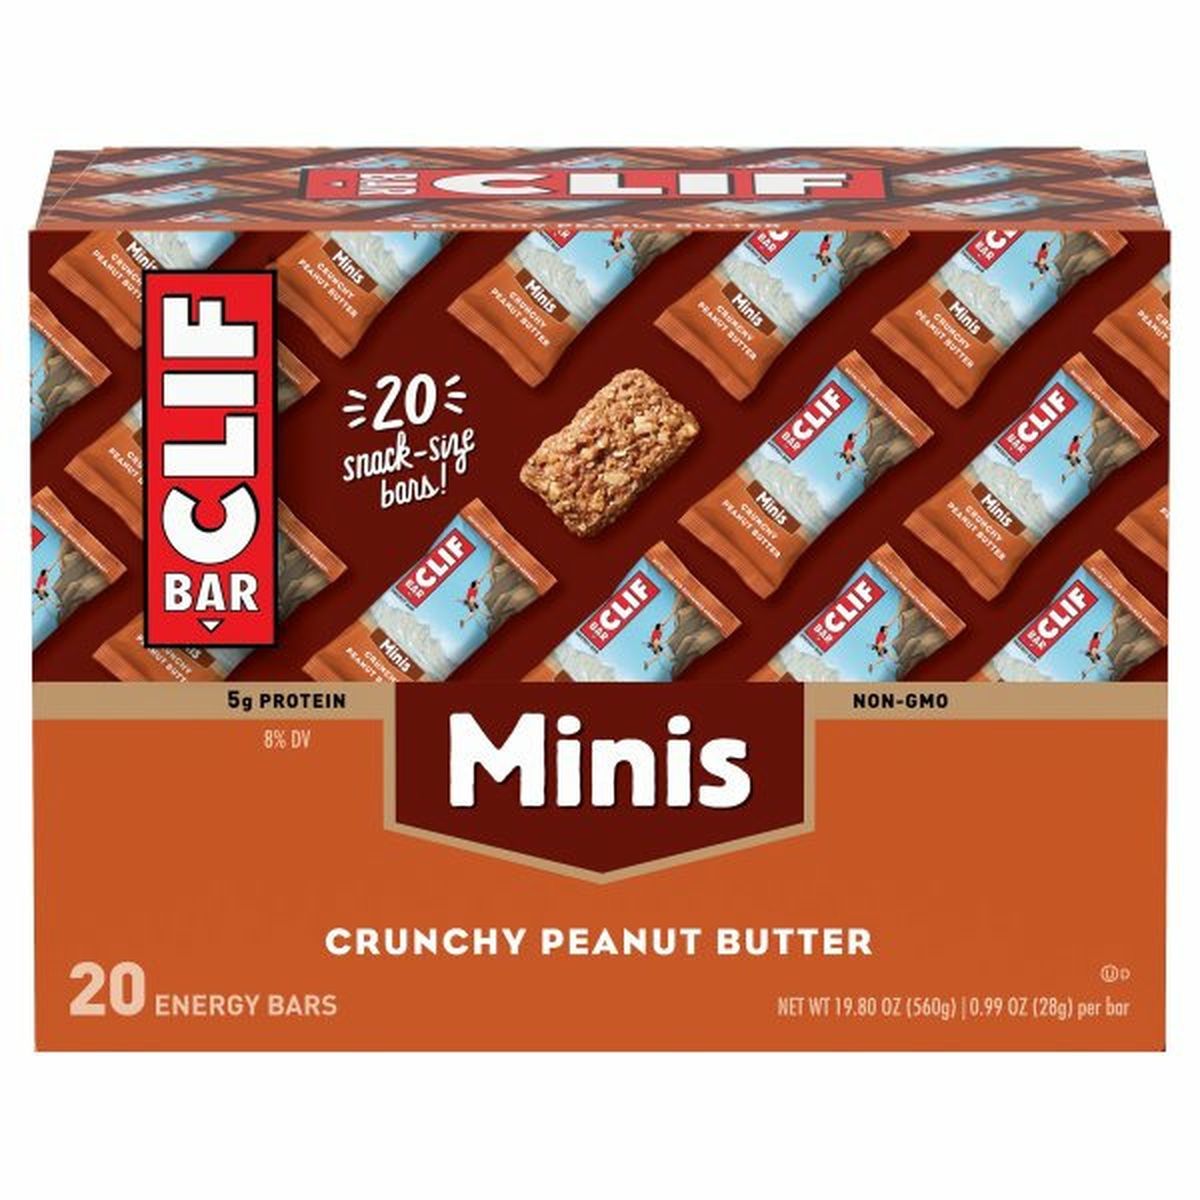 Calories in CLIF BAR Energy Bars, Crunchy Peanut Butter, Minis